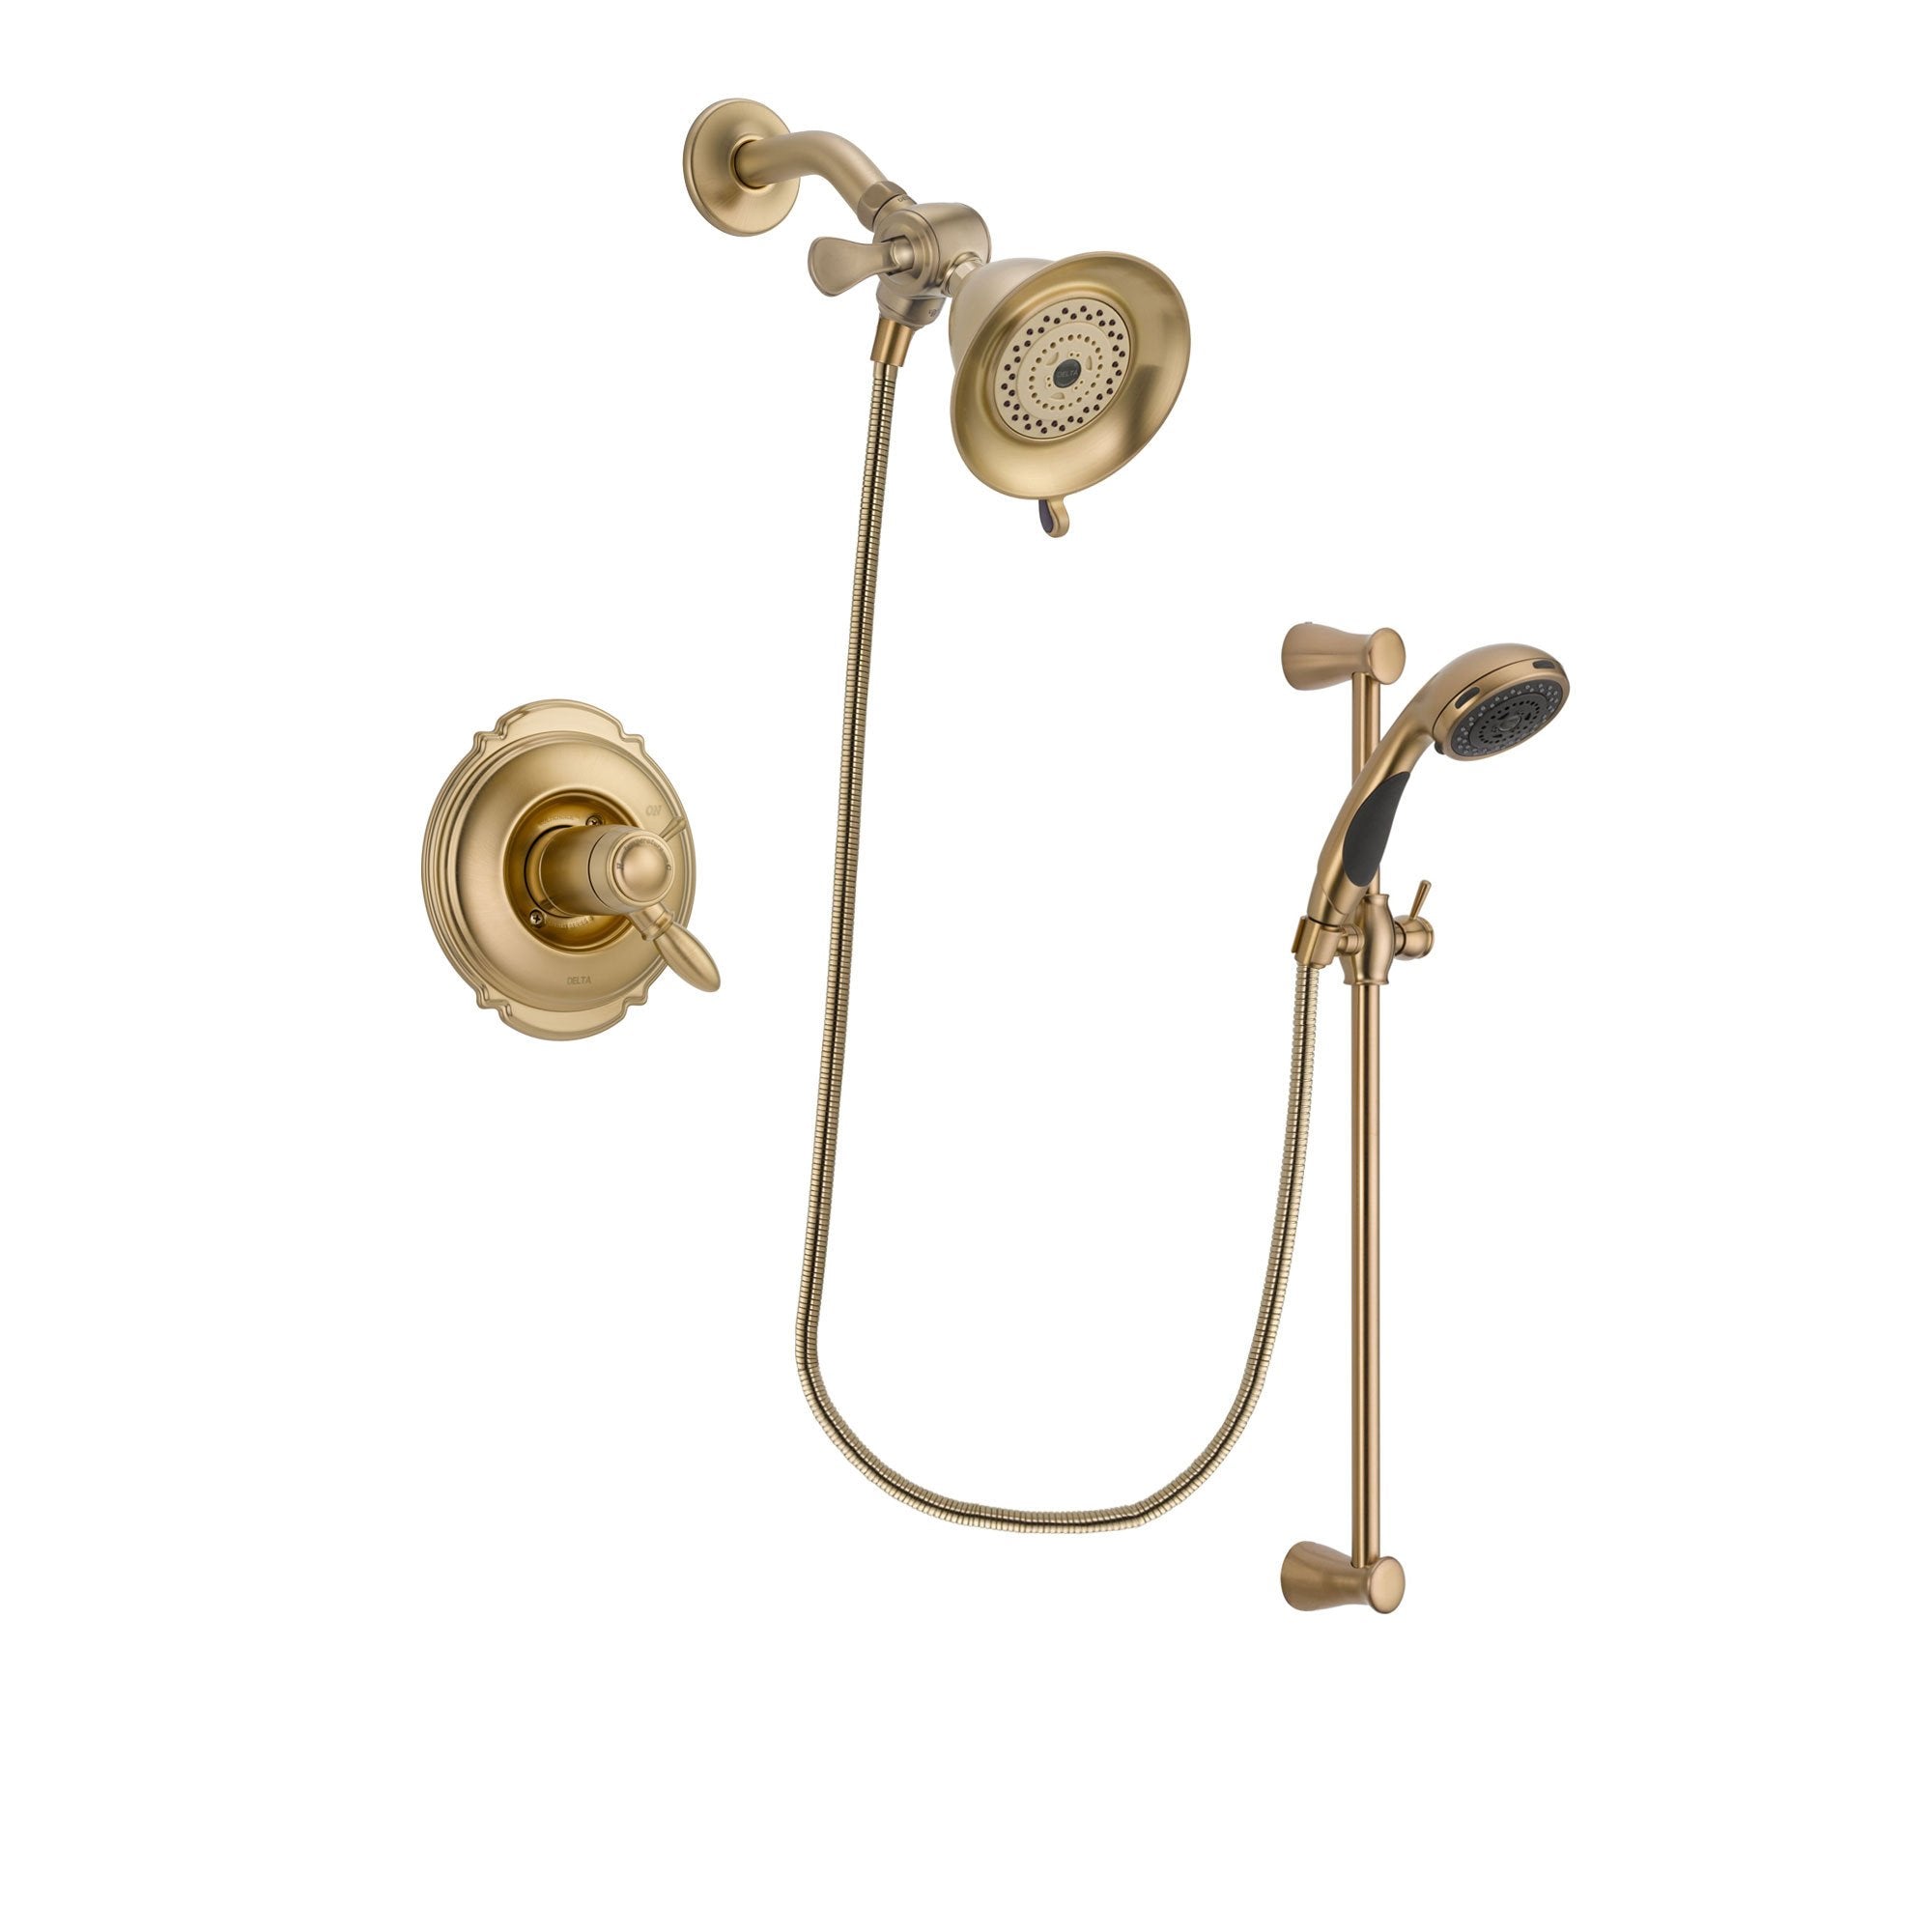 Delta Victorian Champagne Bronze Finish Thermostatic Shower Faucet System Package with Water-Efficient Shower Head and Personal Handheld Shower Sprayer with Slide Bar Includes Rough-in Valve DSP3424V